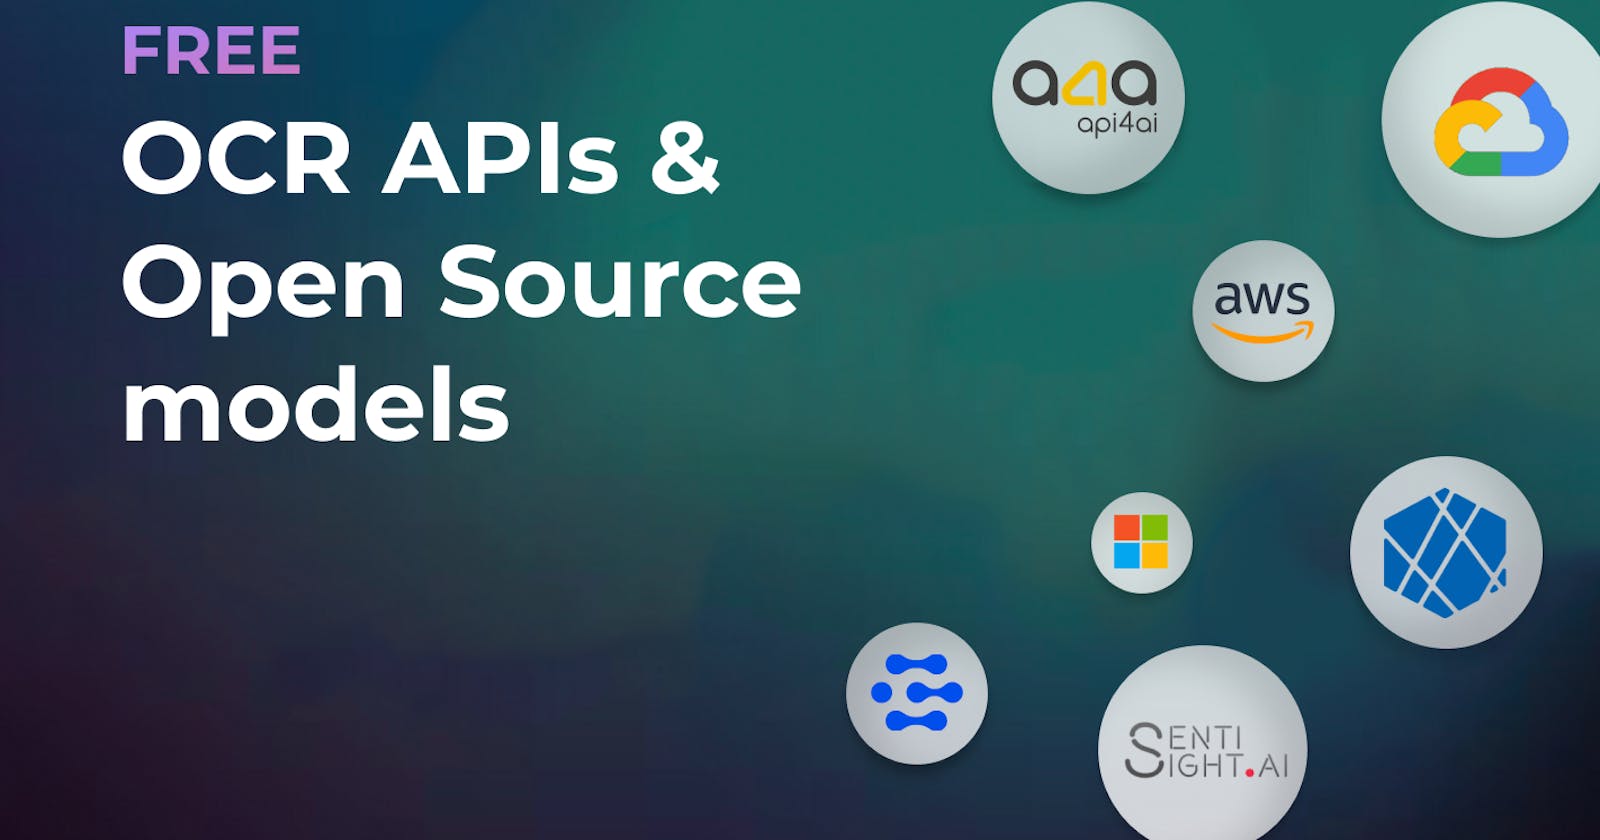 Top Free OCR tools, APIs, and Open Source models